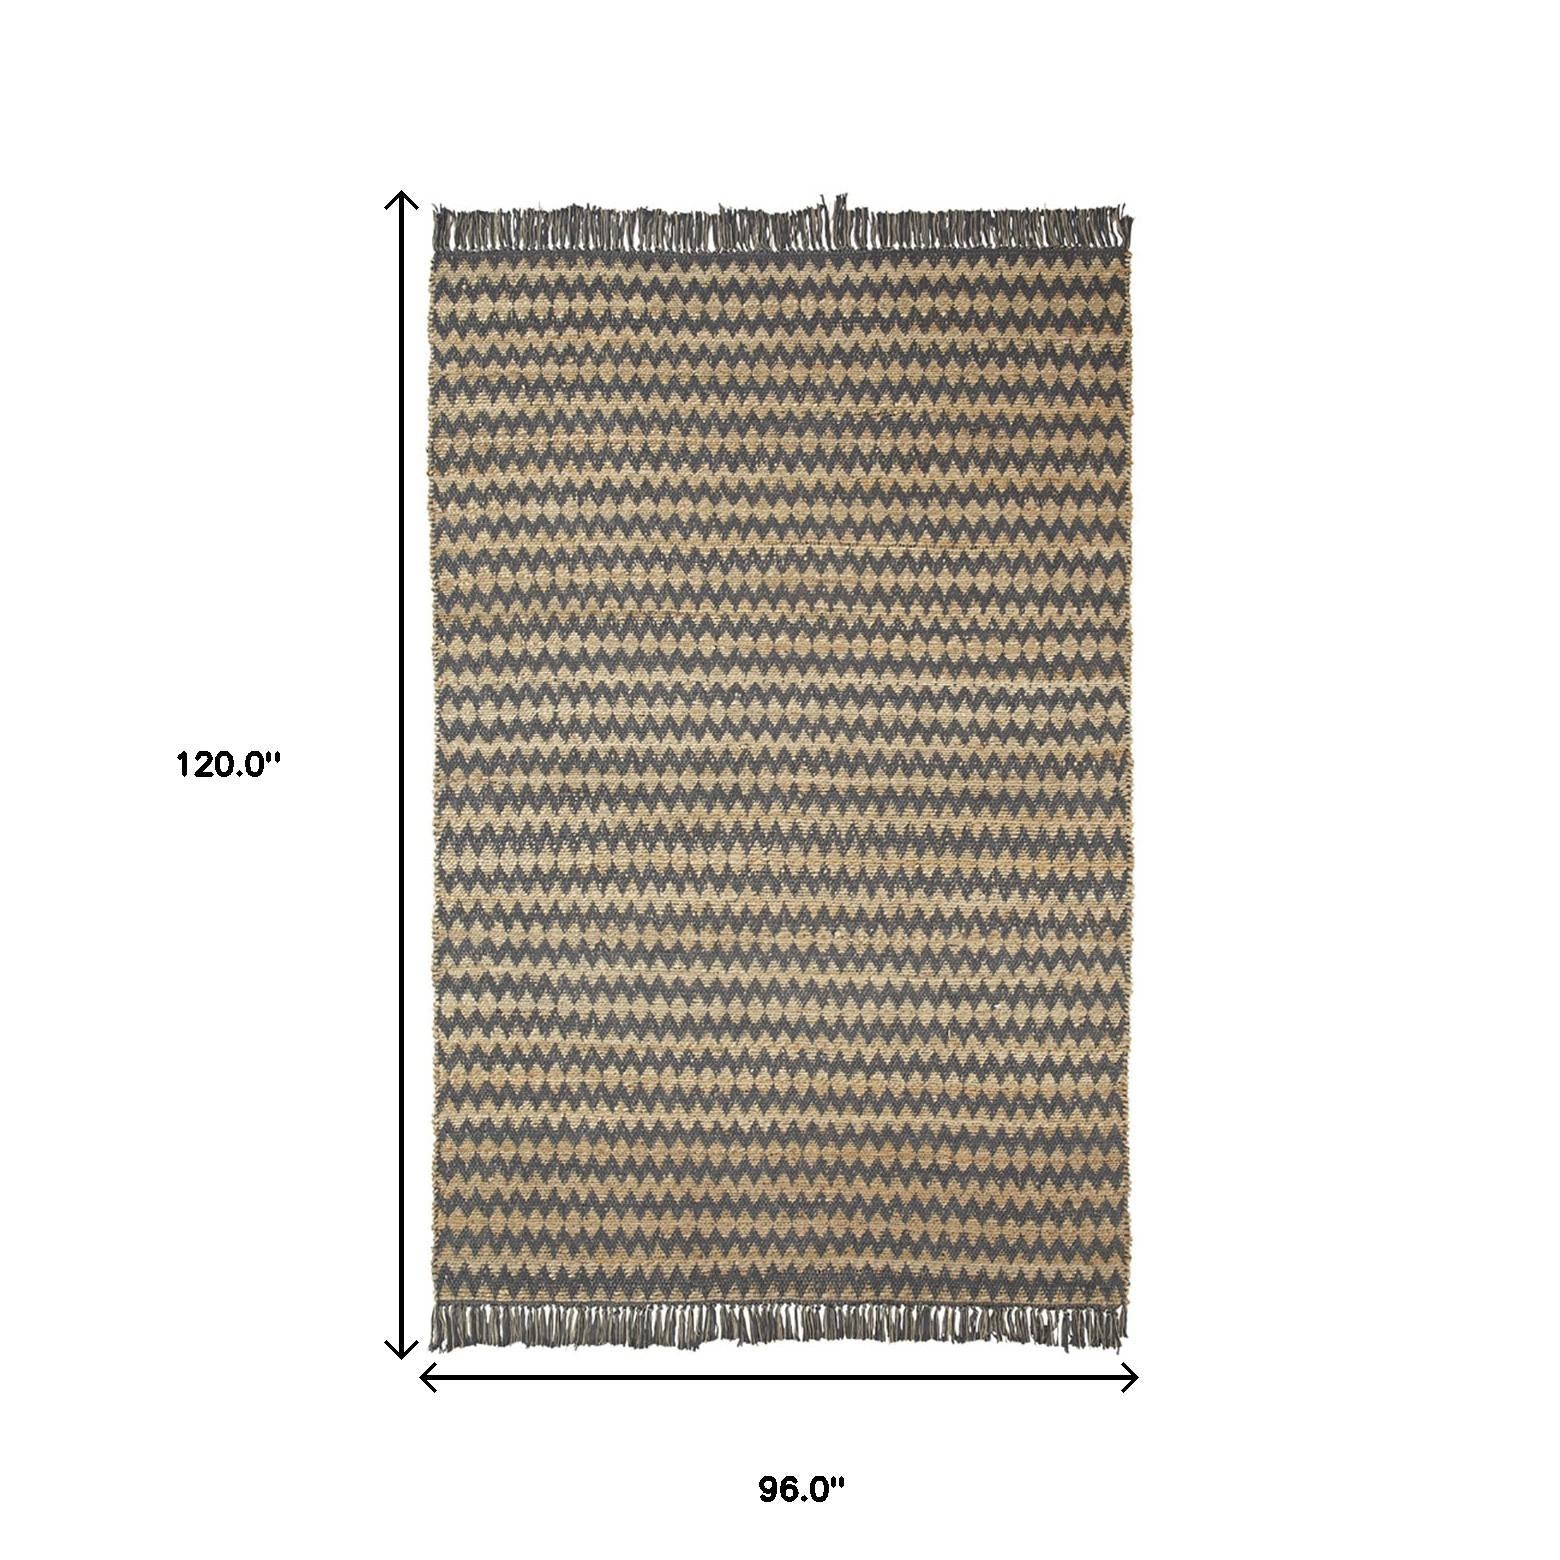 8' X 10' Grey Chevron Hand Woven Stain Resistant Area Rug With Fringe Default Title